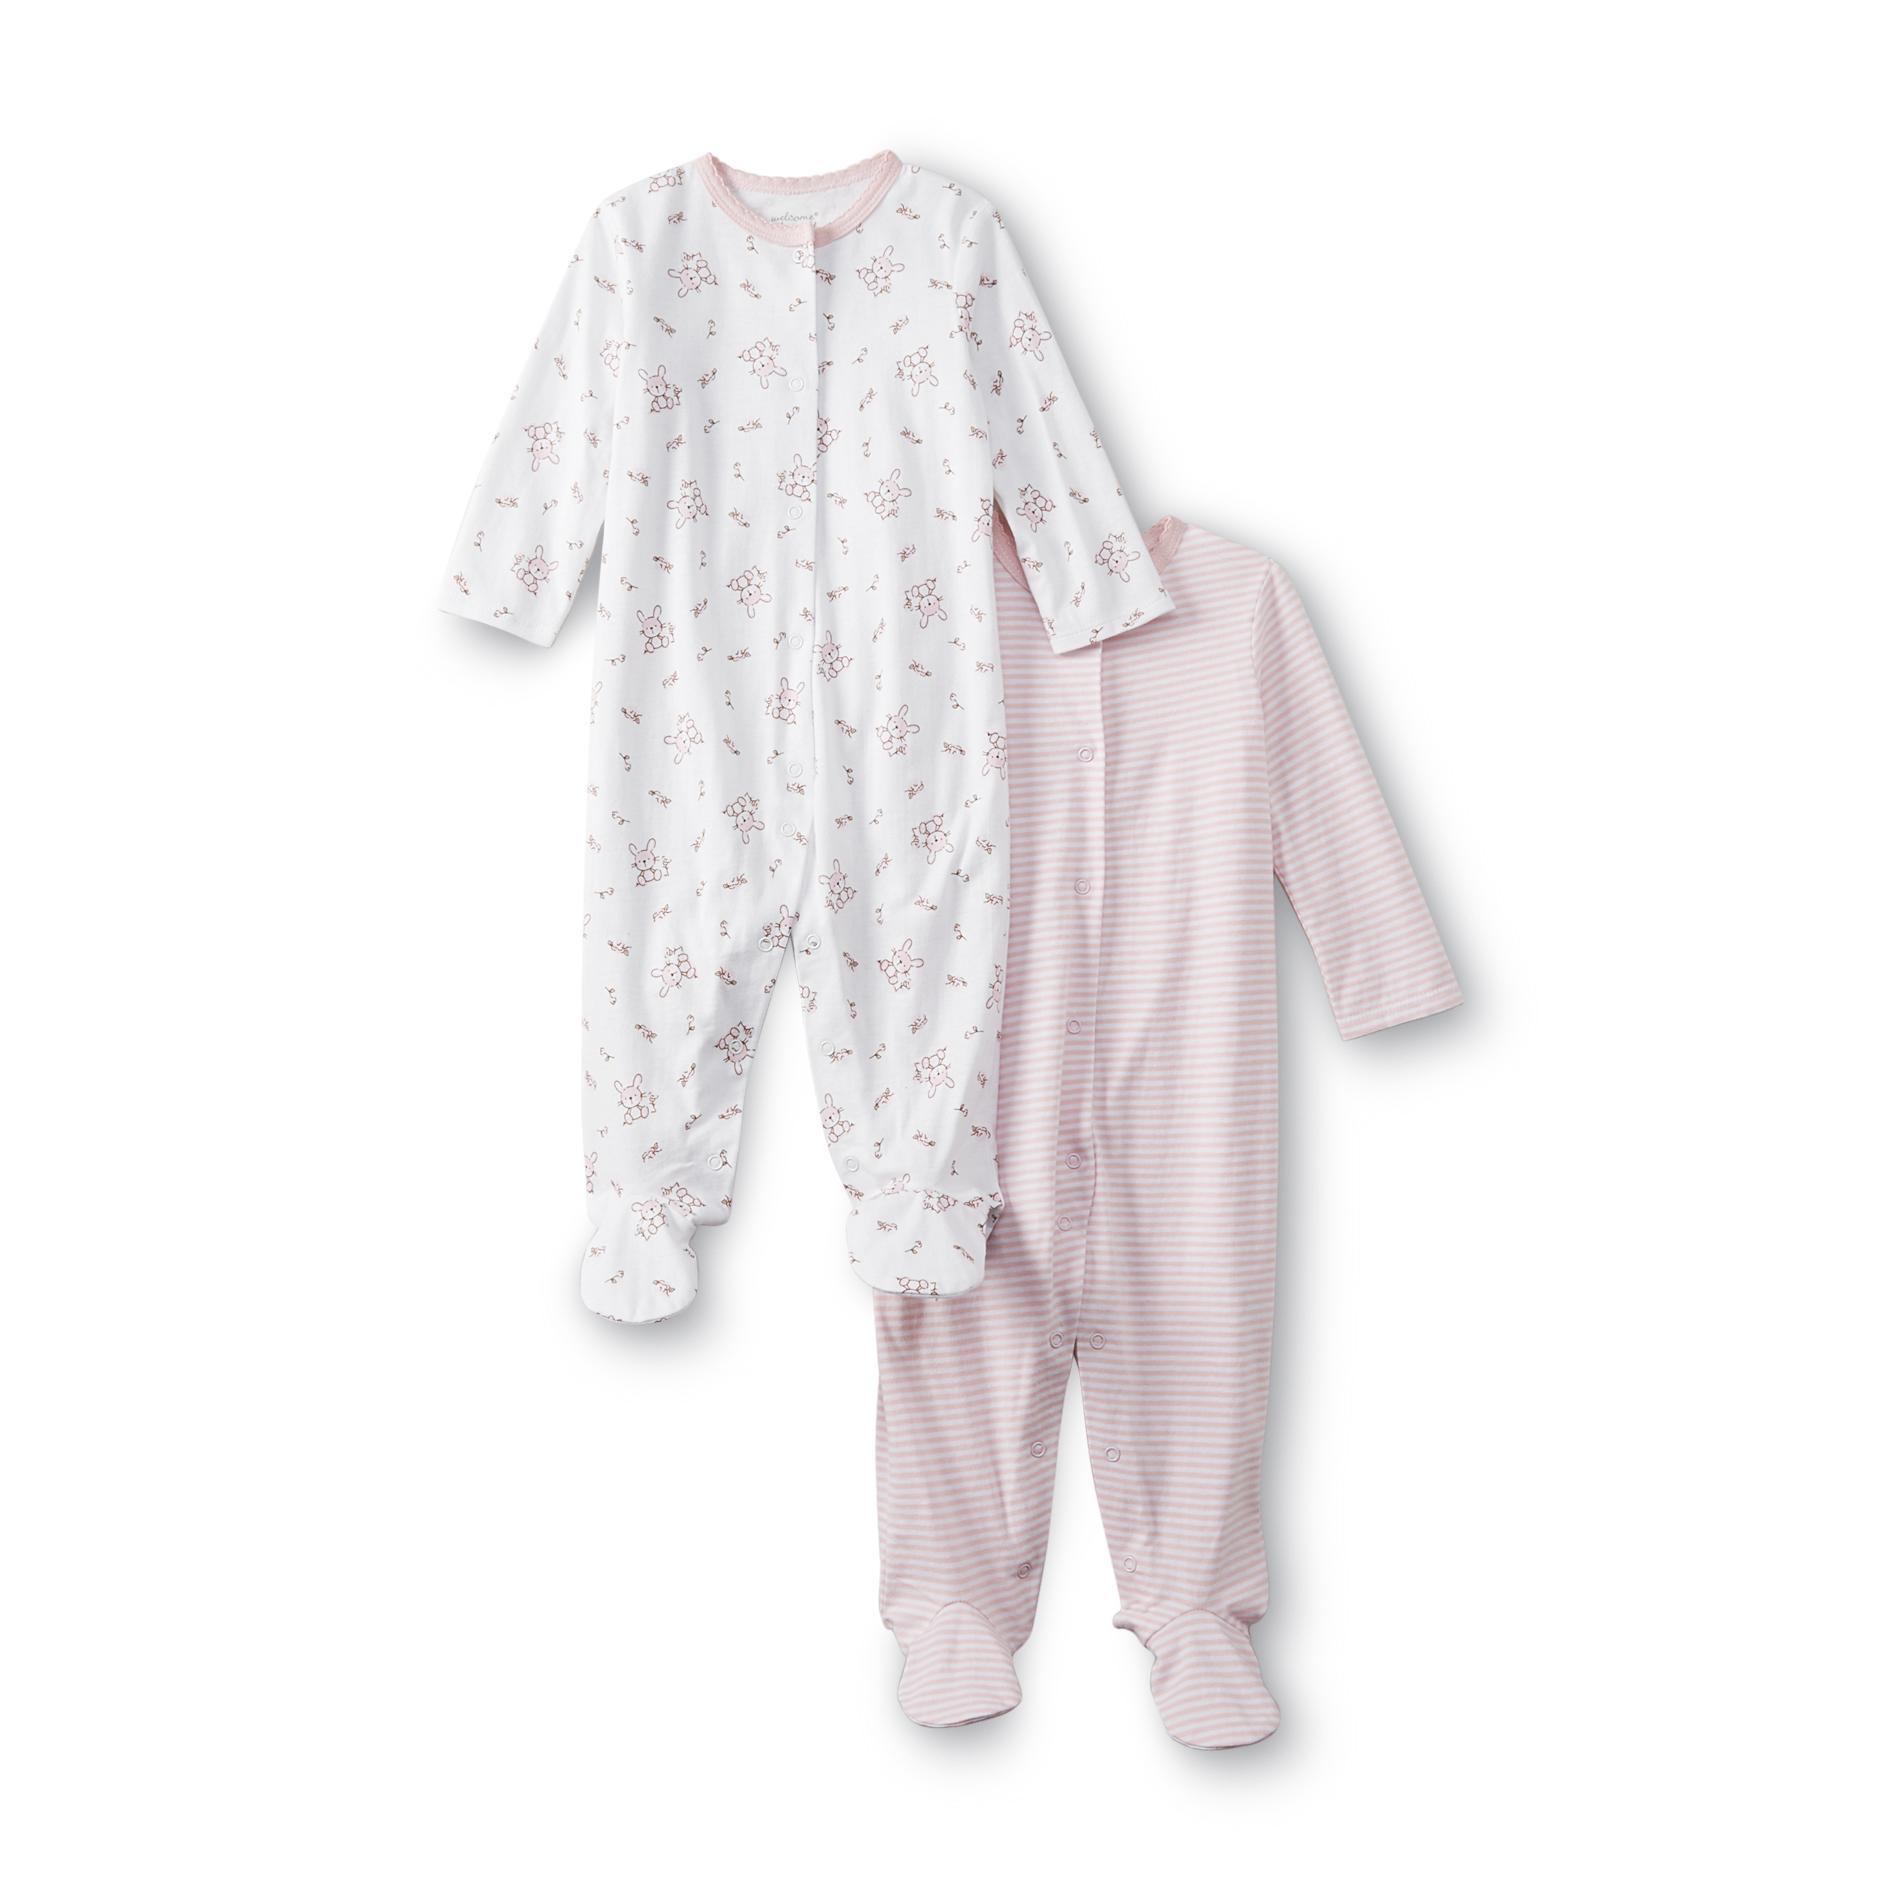 Welcome to the World Newborn Girl's 2-Pack Footed Sleepers - Bunny